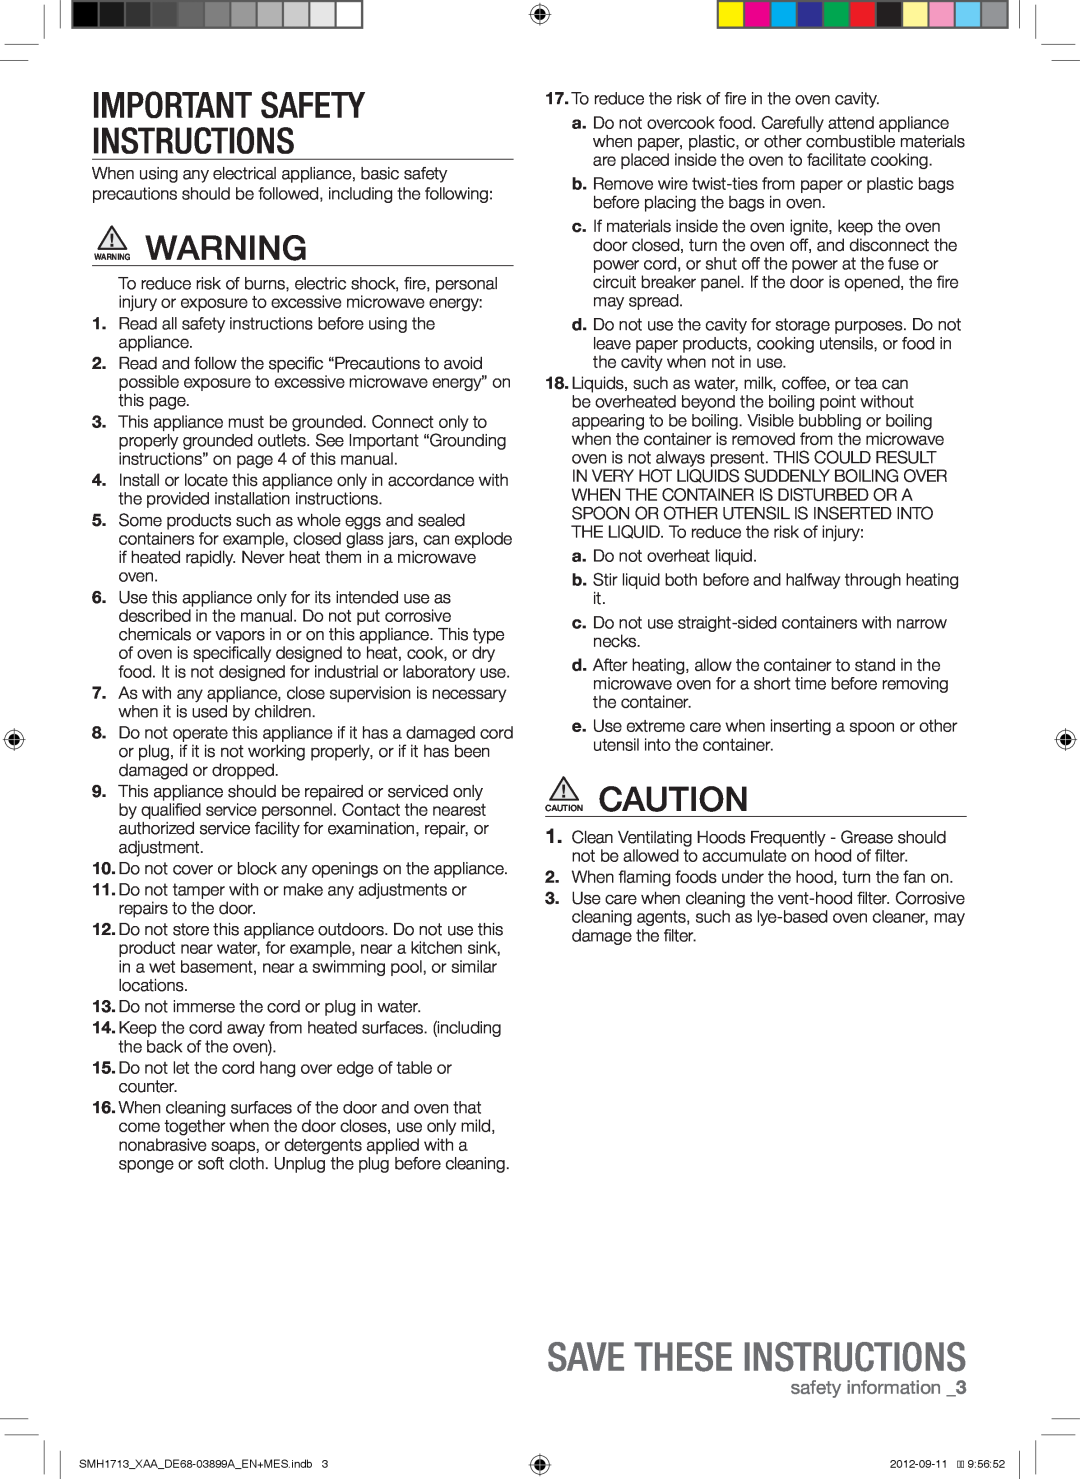 Samsung SMH1713B, SMH1713S, SMH1713W user manual Save These Instructions, Important Safety Instructions, safety information 